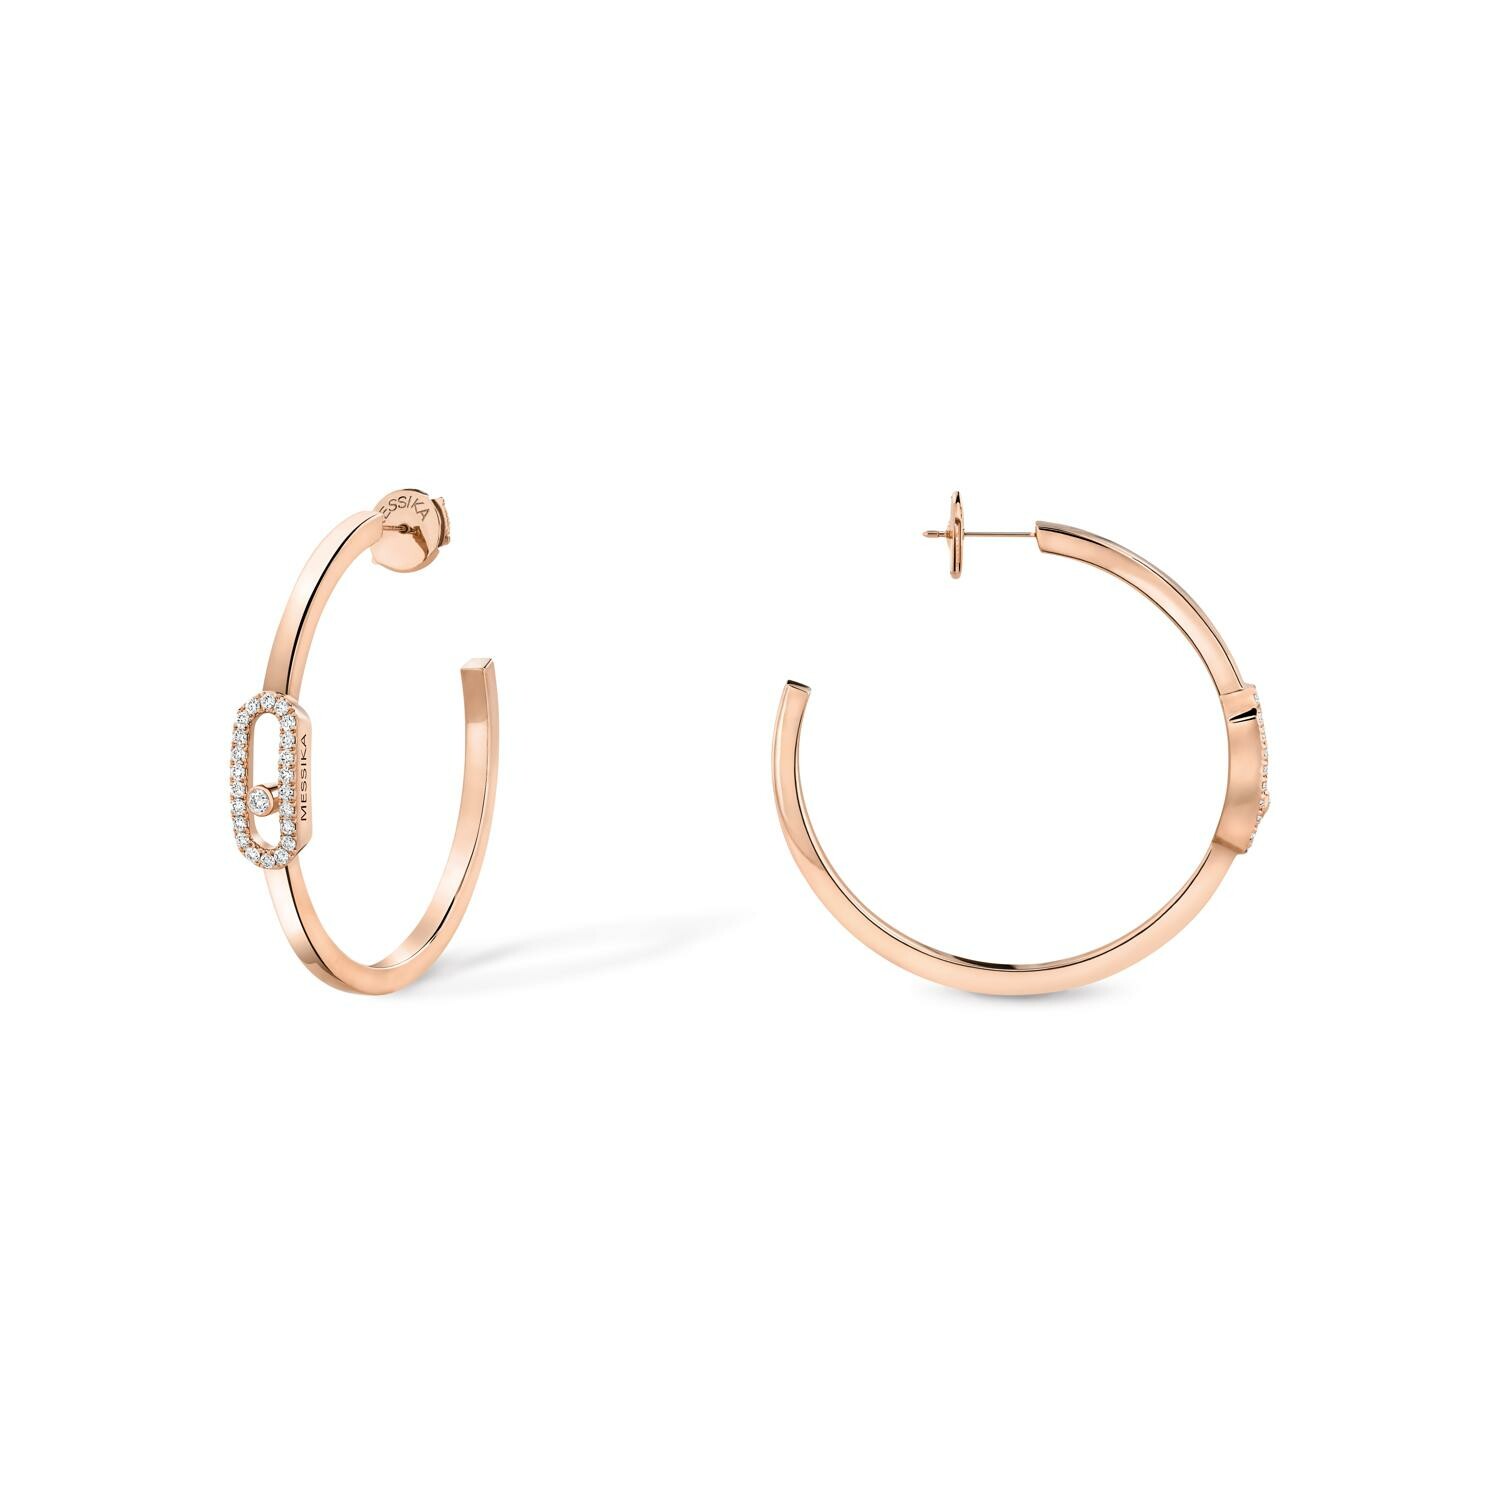 Purchase Messika Move Uno creole earrings, rose gold, diamonds